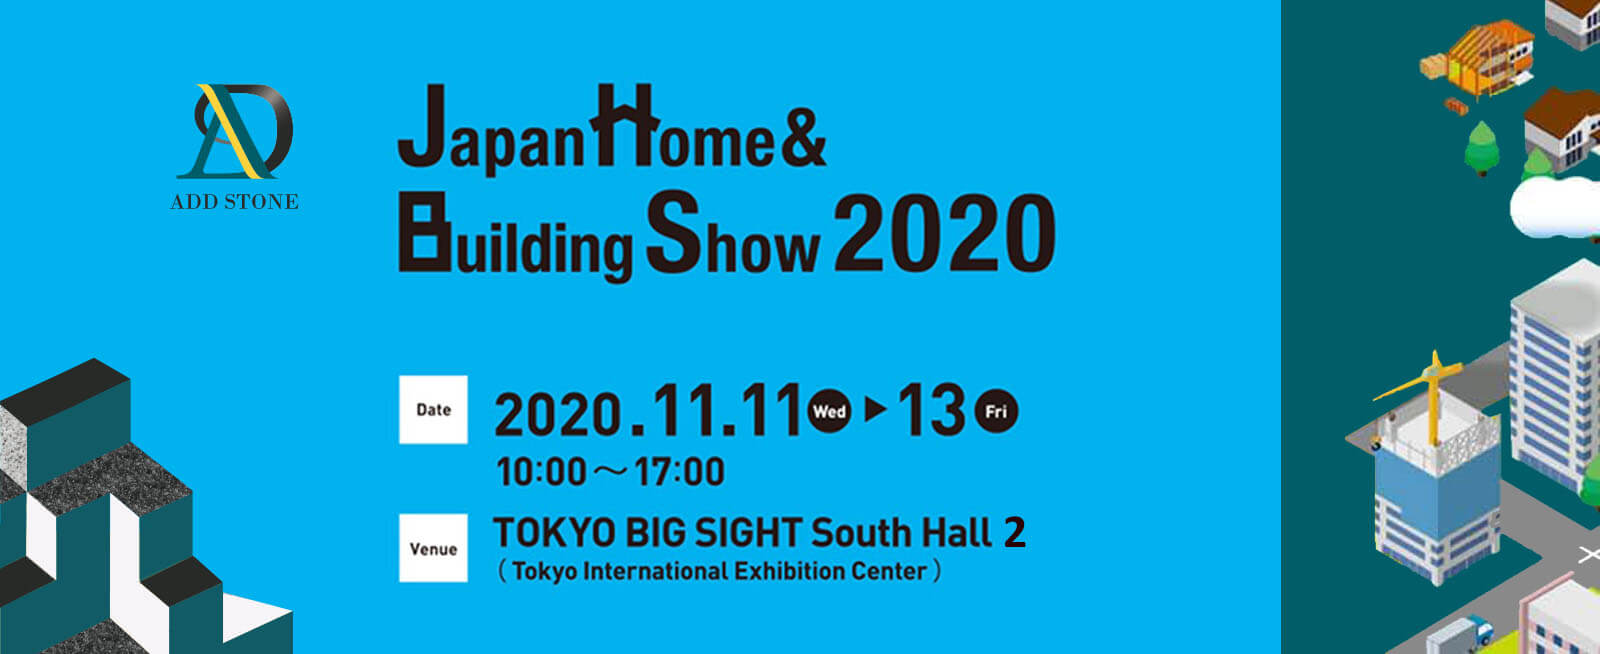 ADD STONE participates JHBS which is held on Wednesday, November 11, 2020 at Tokyo International Exhibition Center.